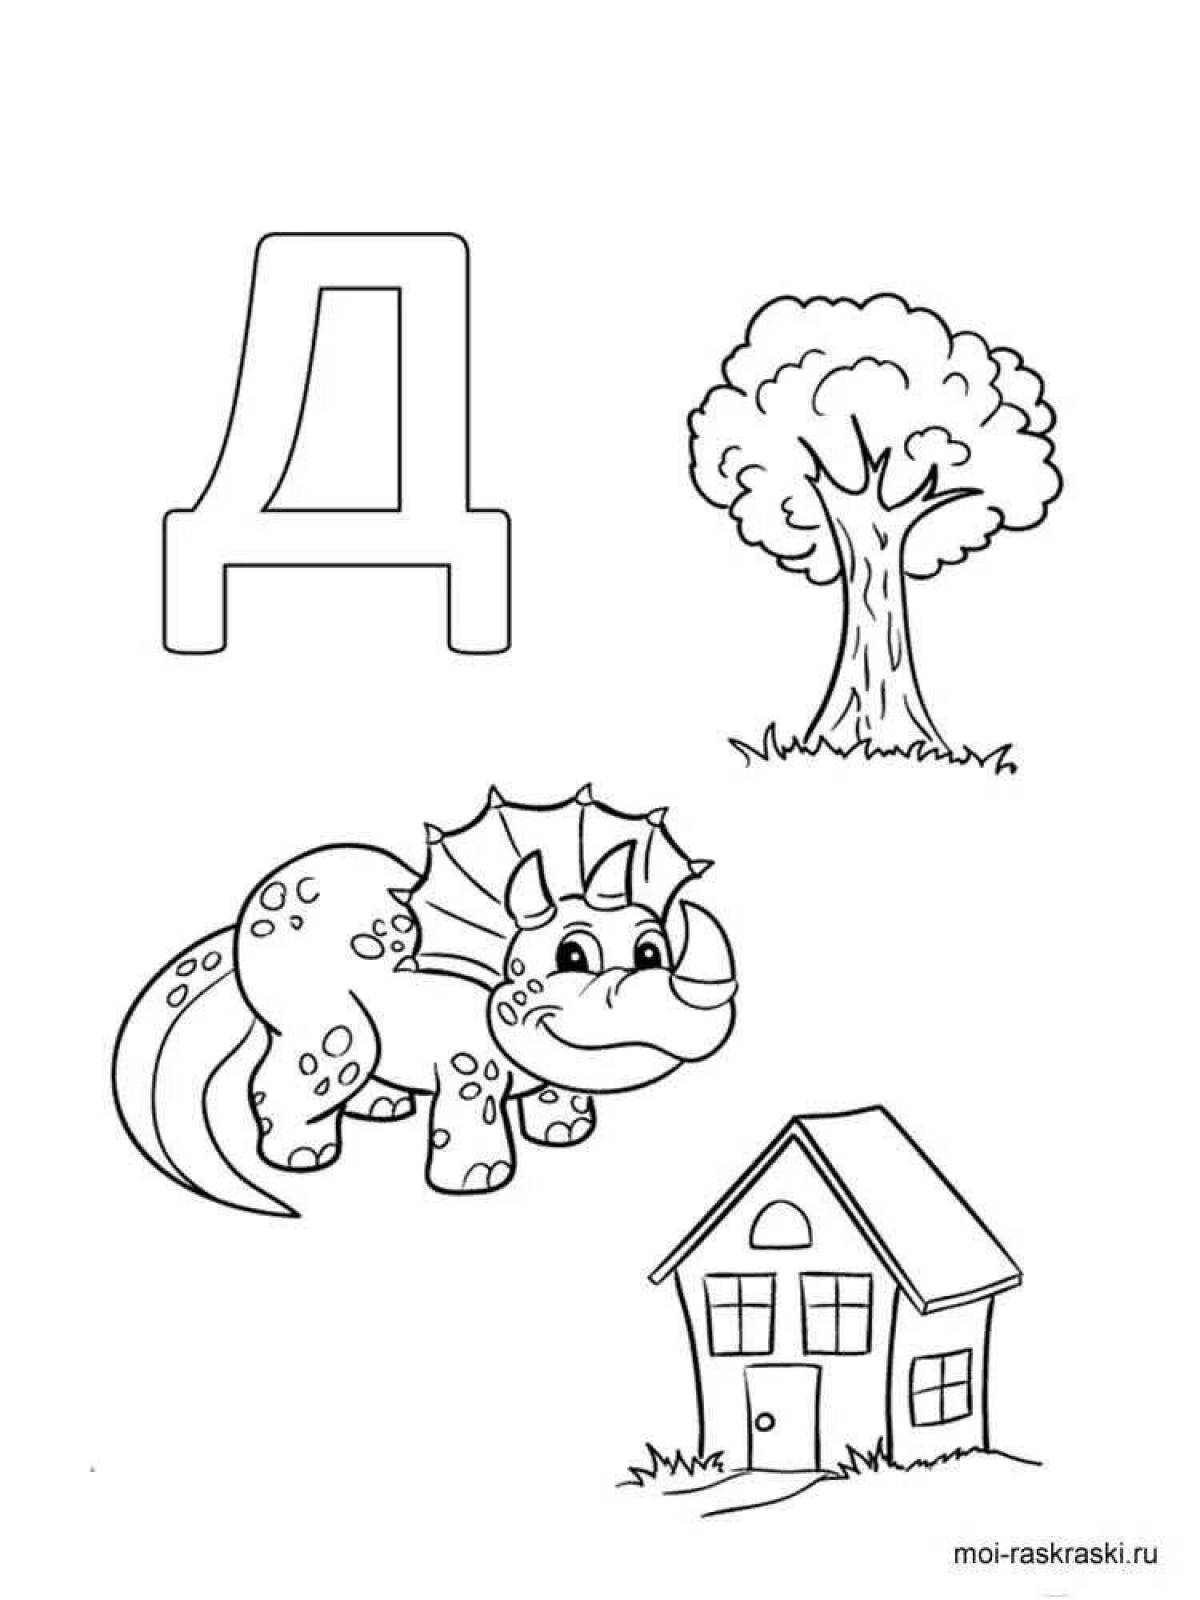 Fun coloring letter for children 5-6 years old